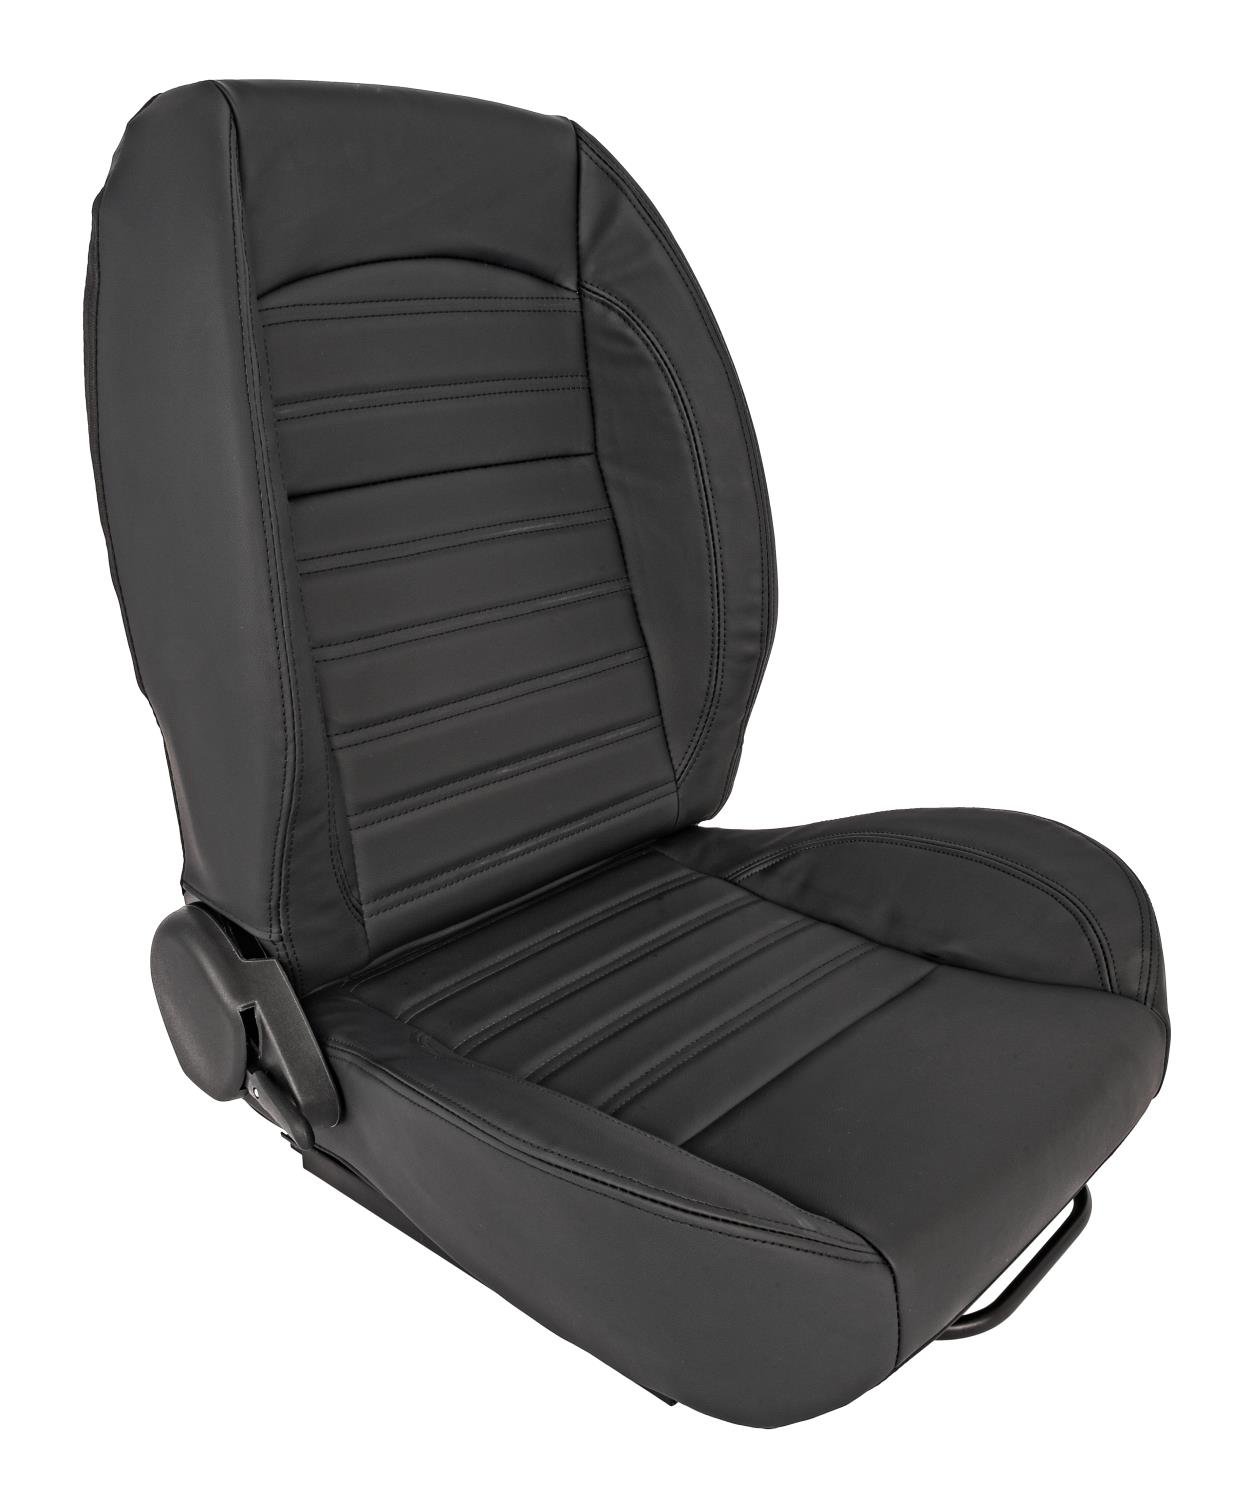 Retro Low Back Reclining Bucket Seat without Headrest, Right/Passenger Side [Black]